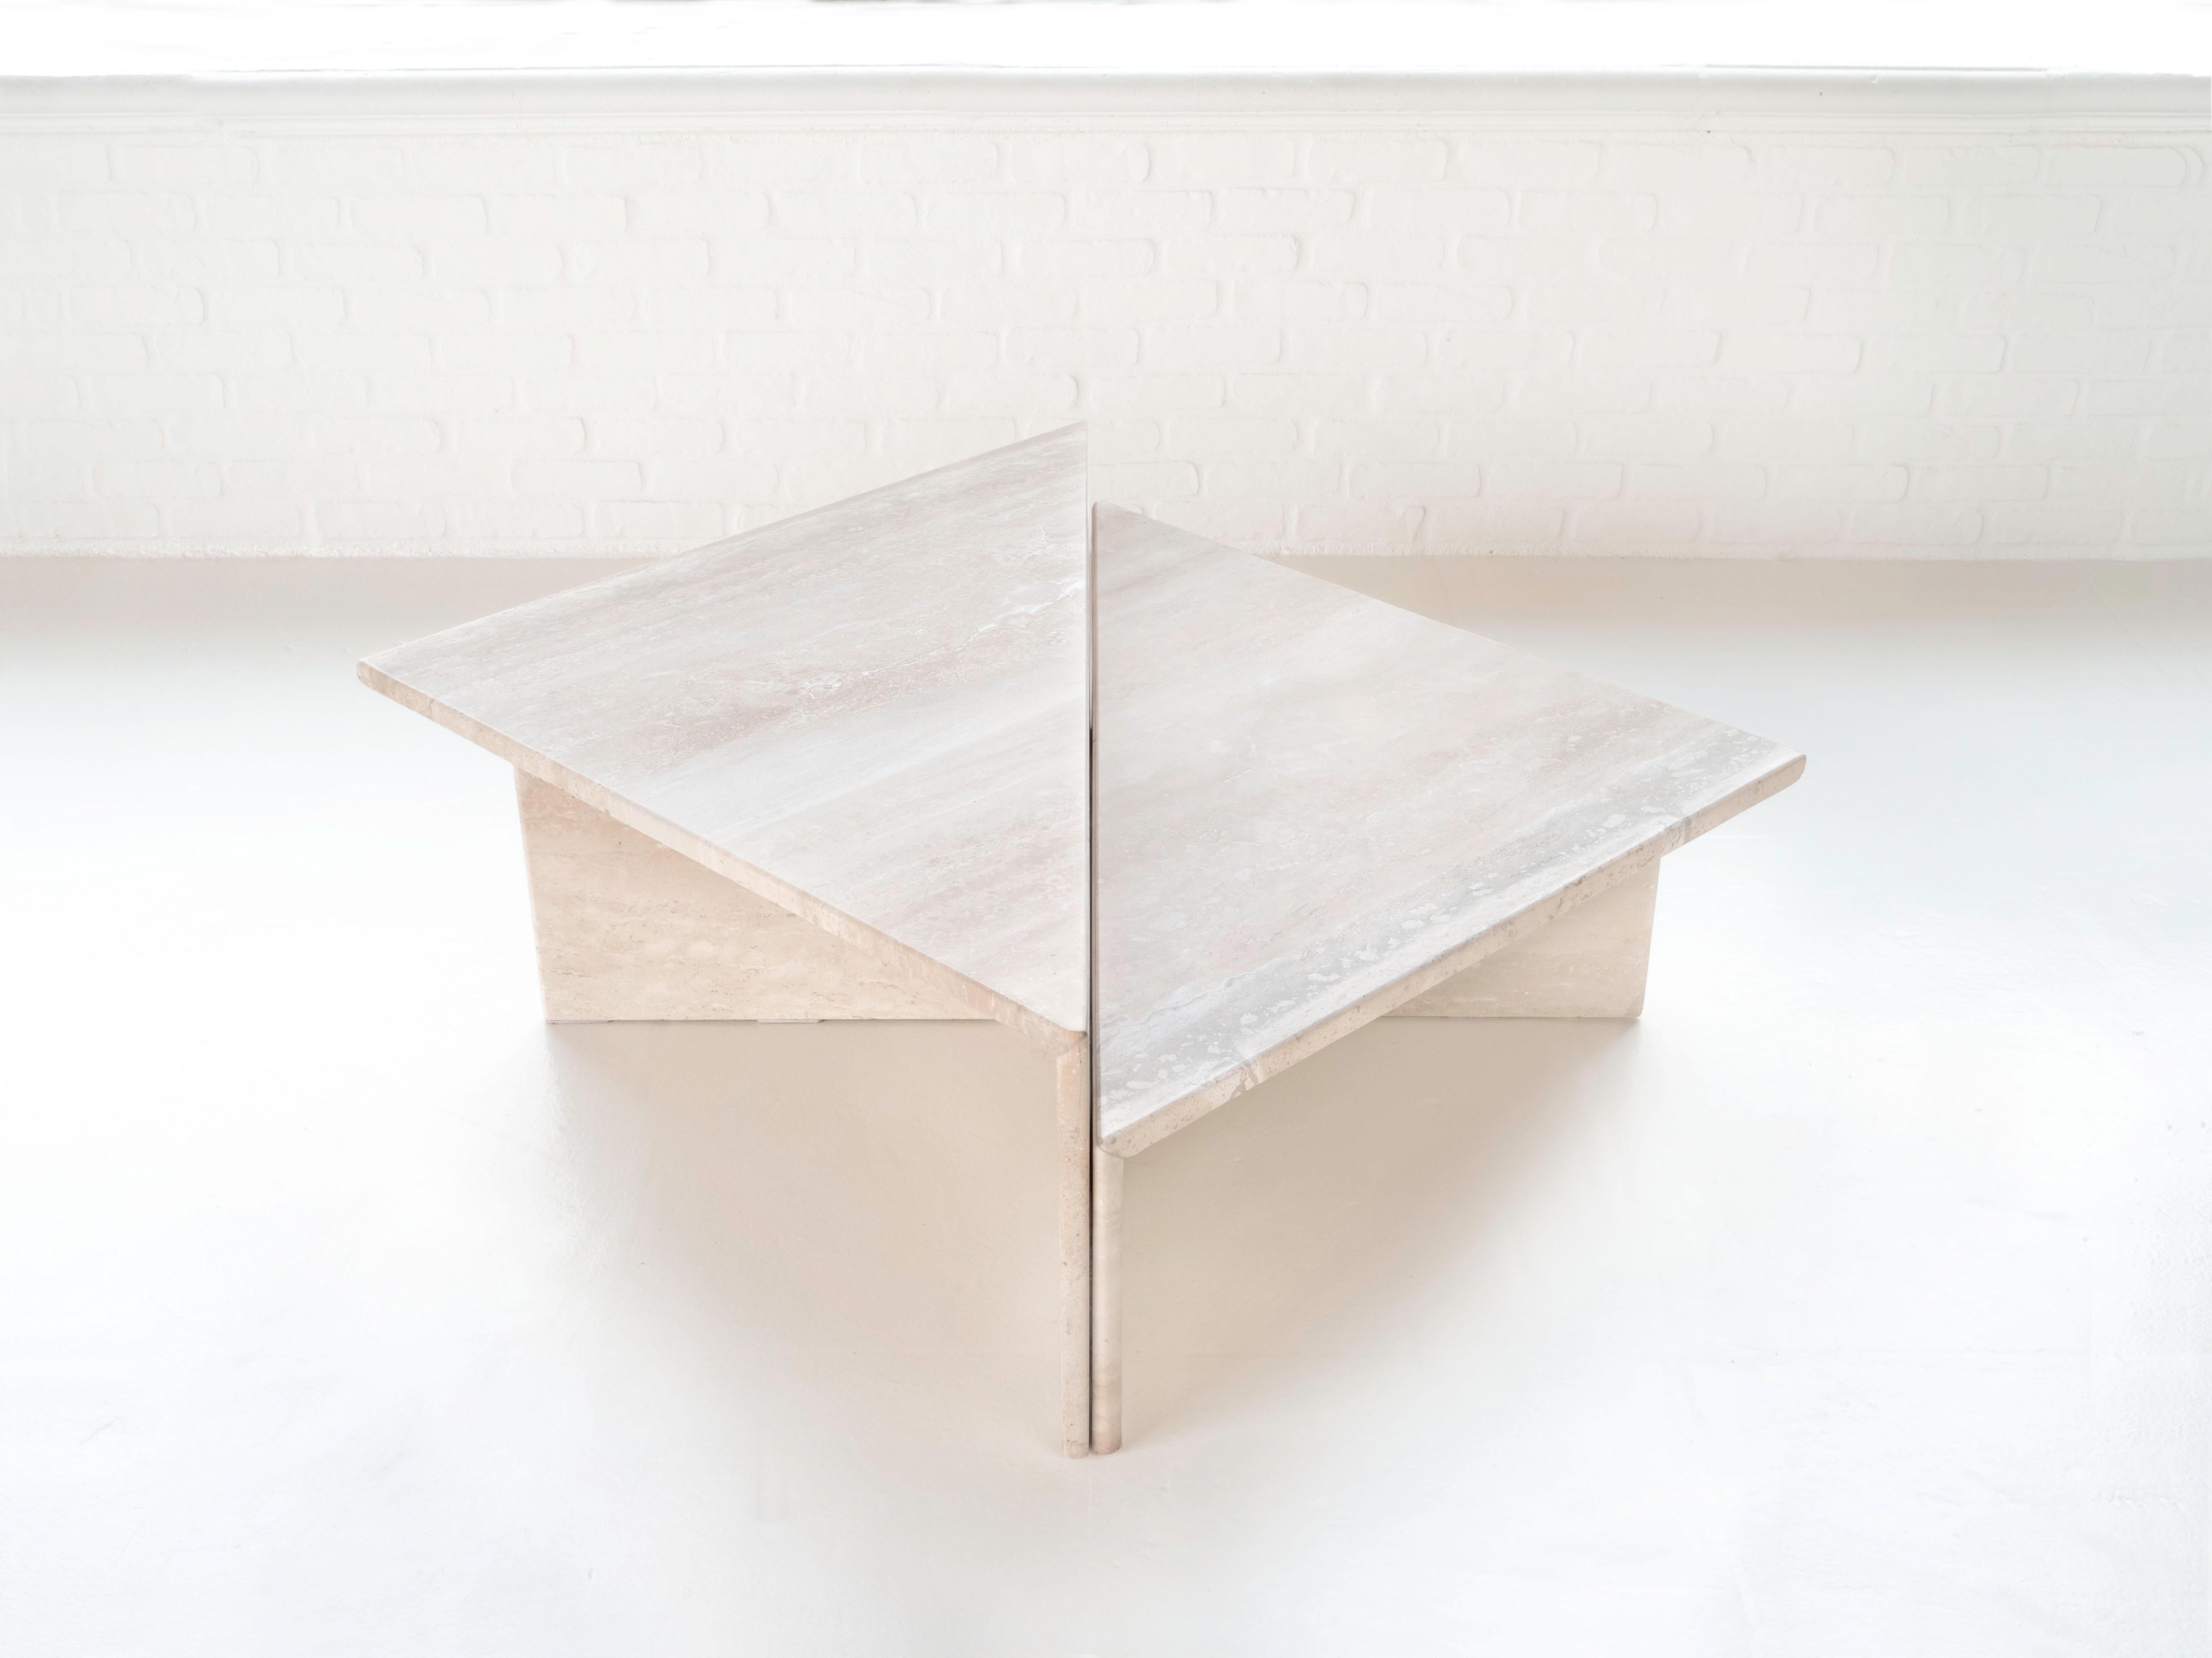 Made from Italian Travertine, circa 1970s. The tables are triangular, when placed together they form a square. One table is slightly higher than the other which creates a tier when fit together. The tables have been resurfaced and sealed. Only